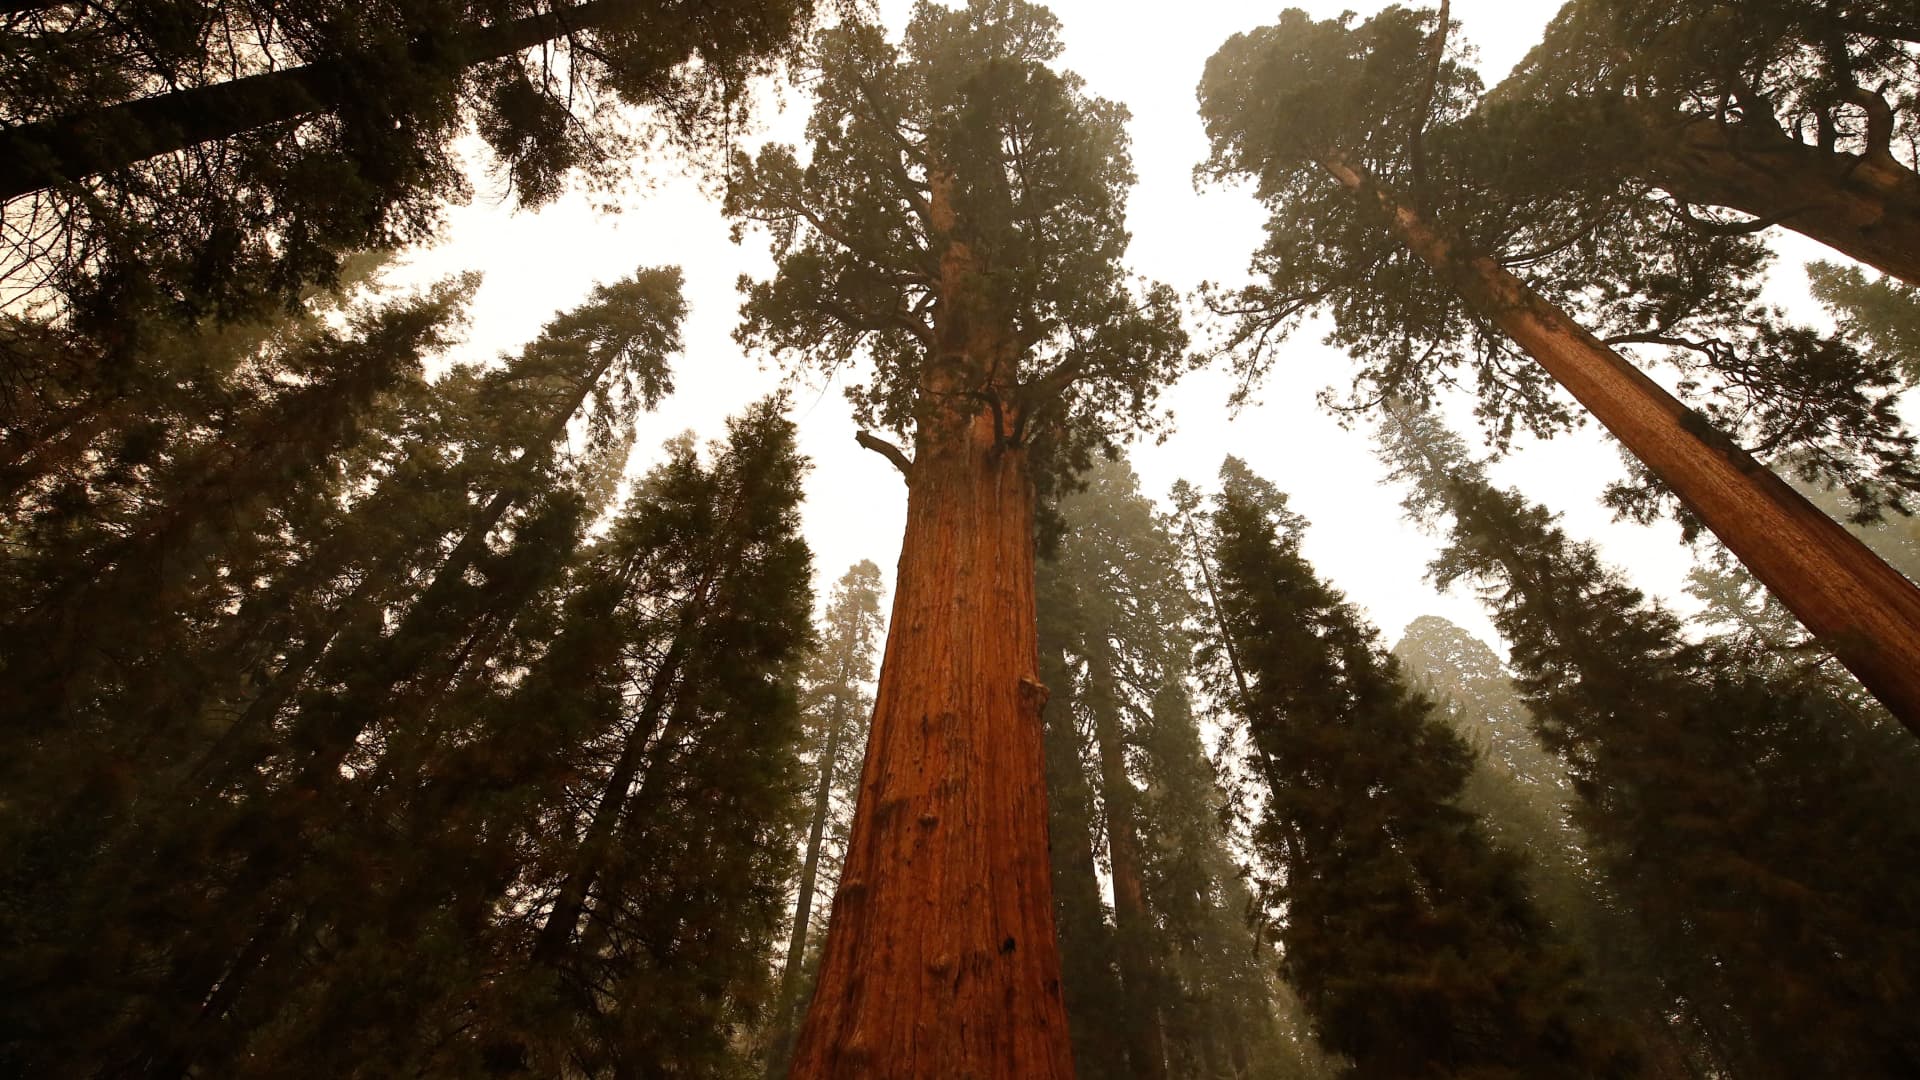 The historic General Sherman tree, which was saved from fires, is seen at Sequoia National Park, California, Sept. 22, 2021.